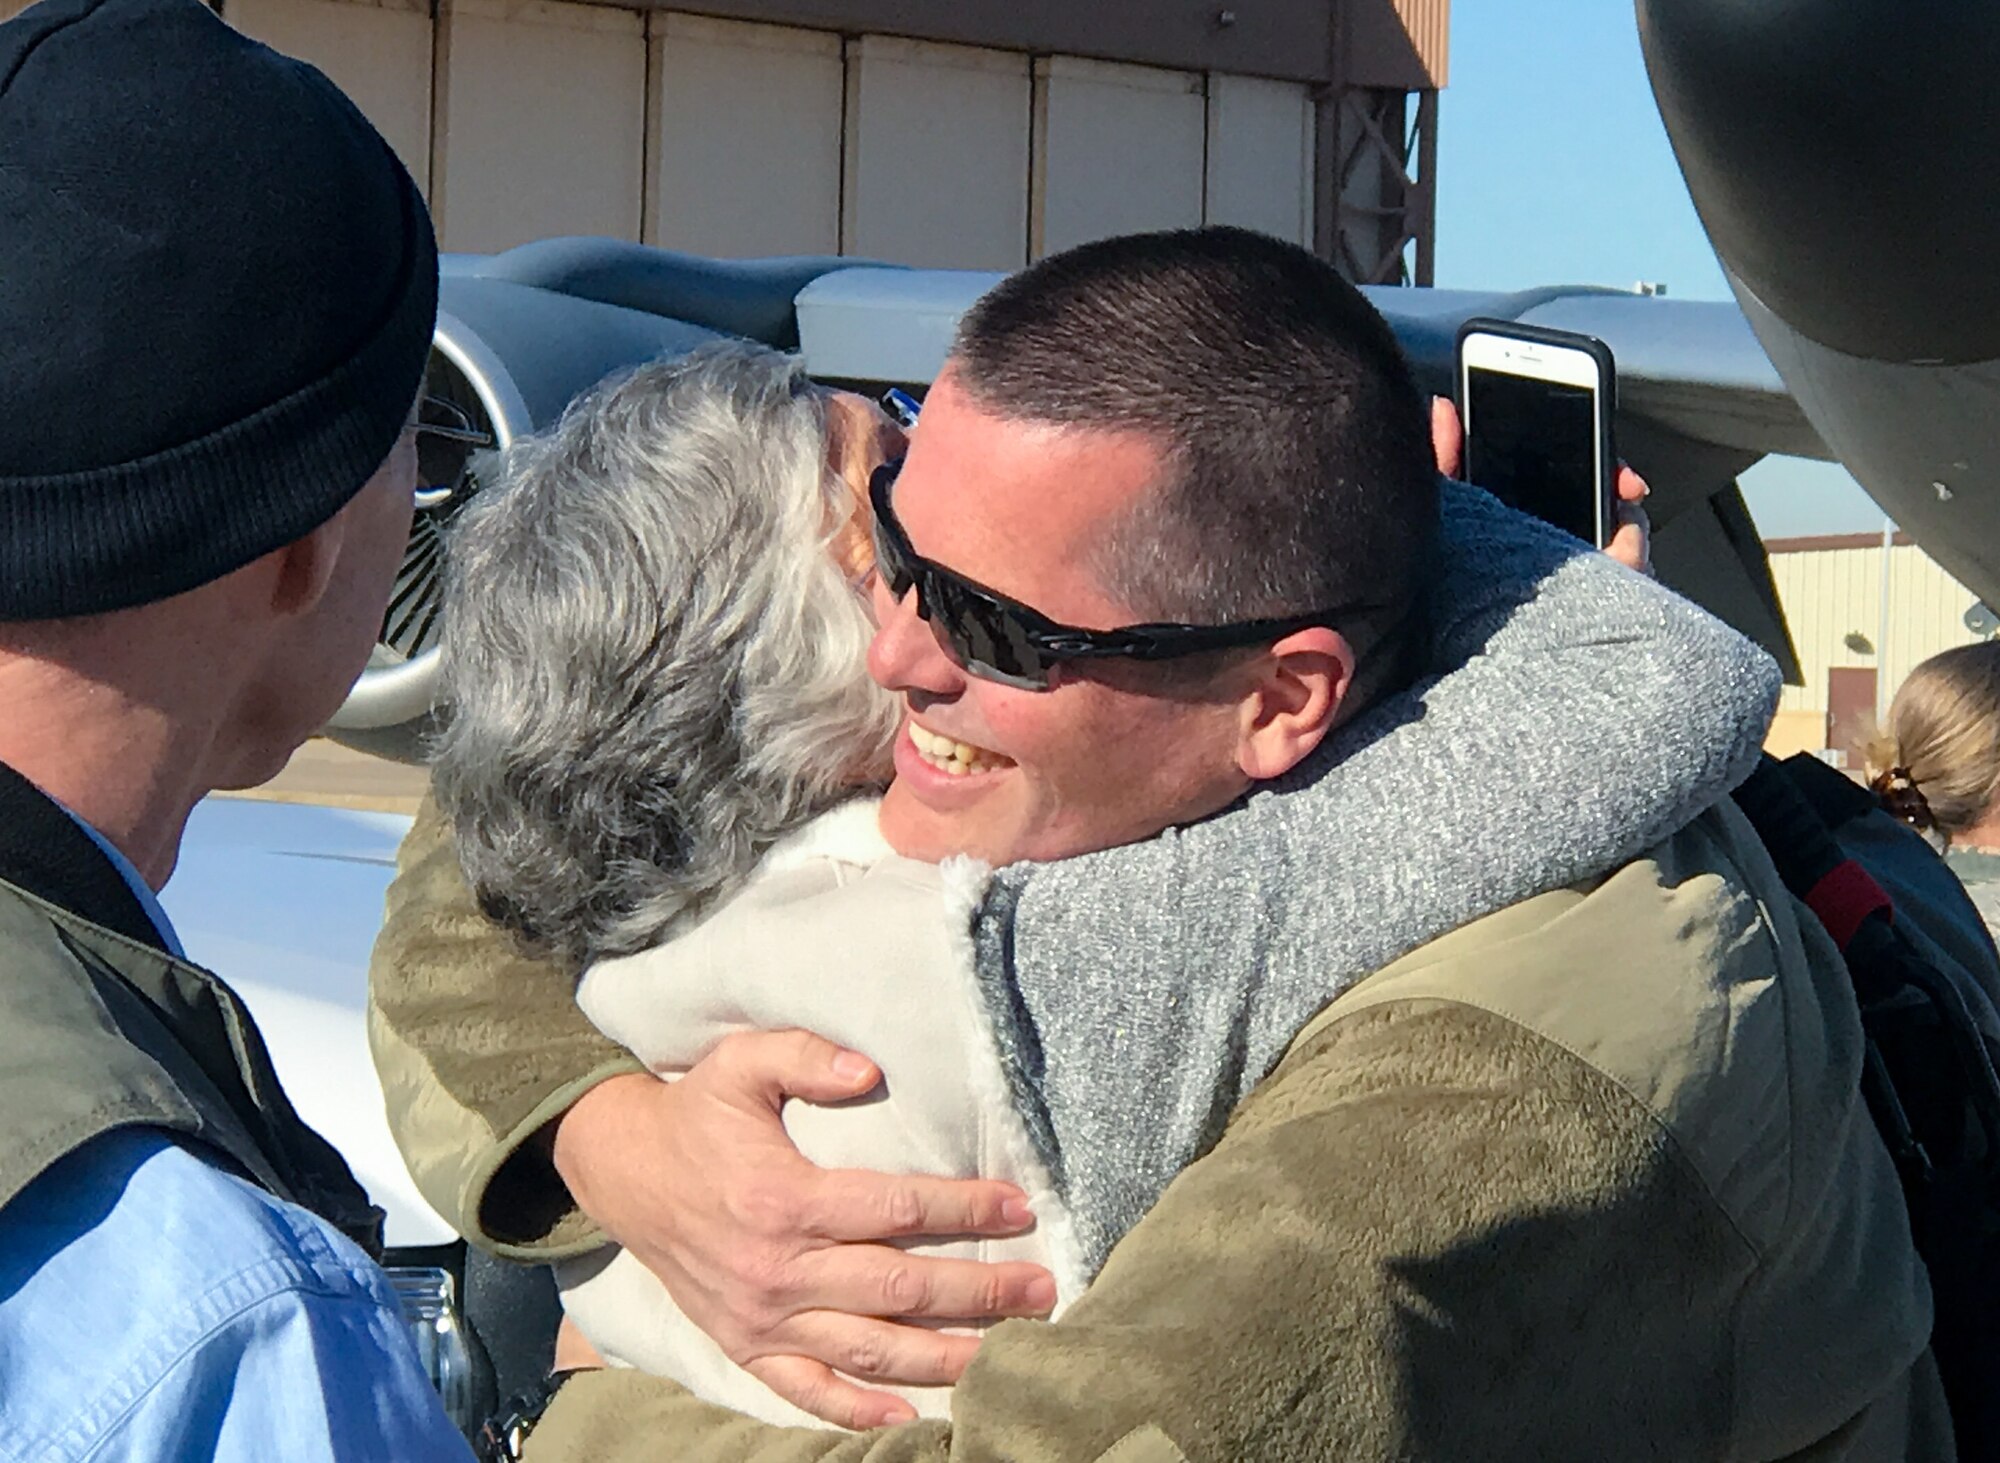 Lt. Col. Stuart Letcher, 507th Operations Support Squadron commander, greets his family upon returning home from a deployment to Southwest Asia Nov. 25, 2019, at Tinker Air Force Base, Oklahoma. (U.S. Air Force photo by Lauren Kelly)